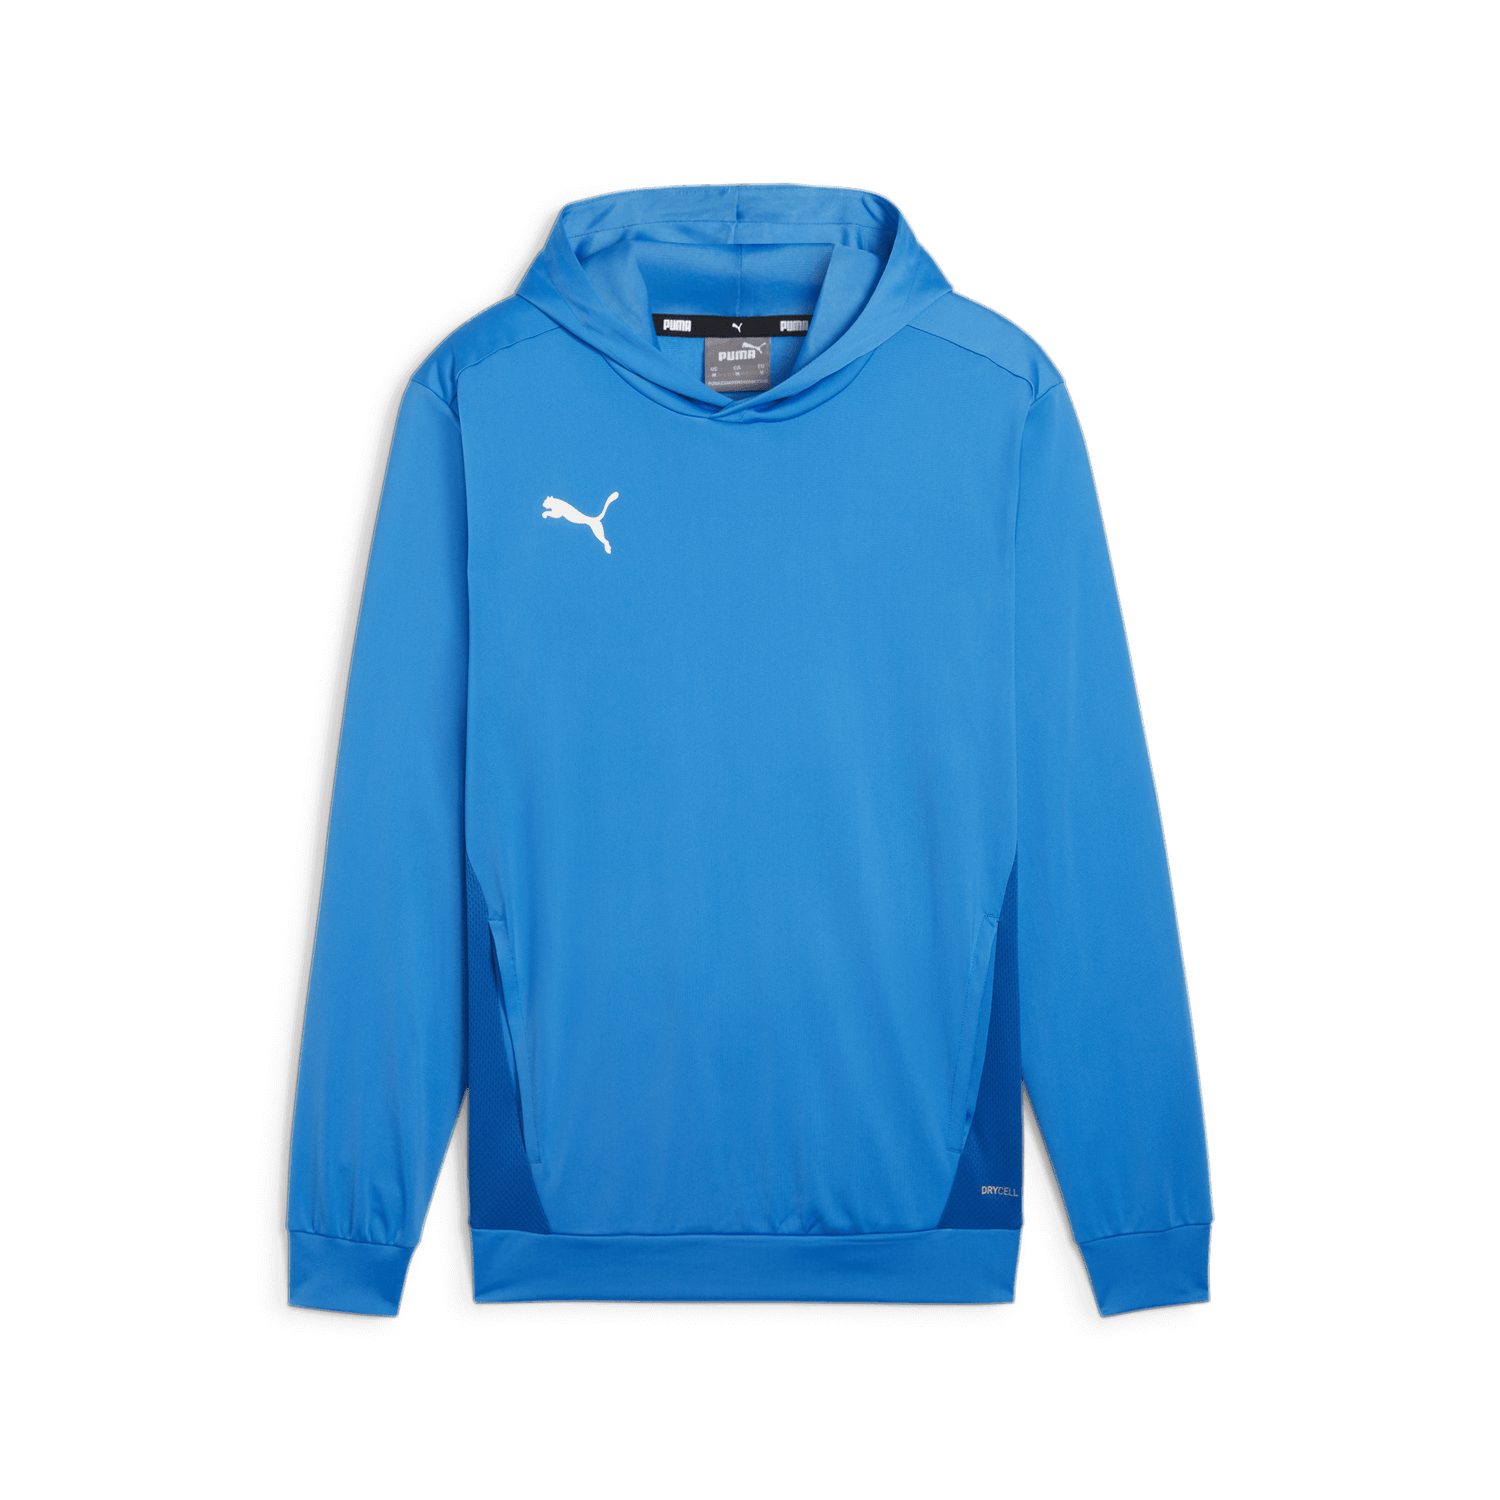 Puma Hoodies for Soccer Teams | Padded and Training Styles